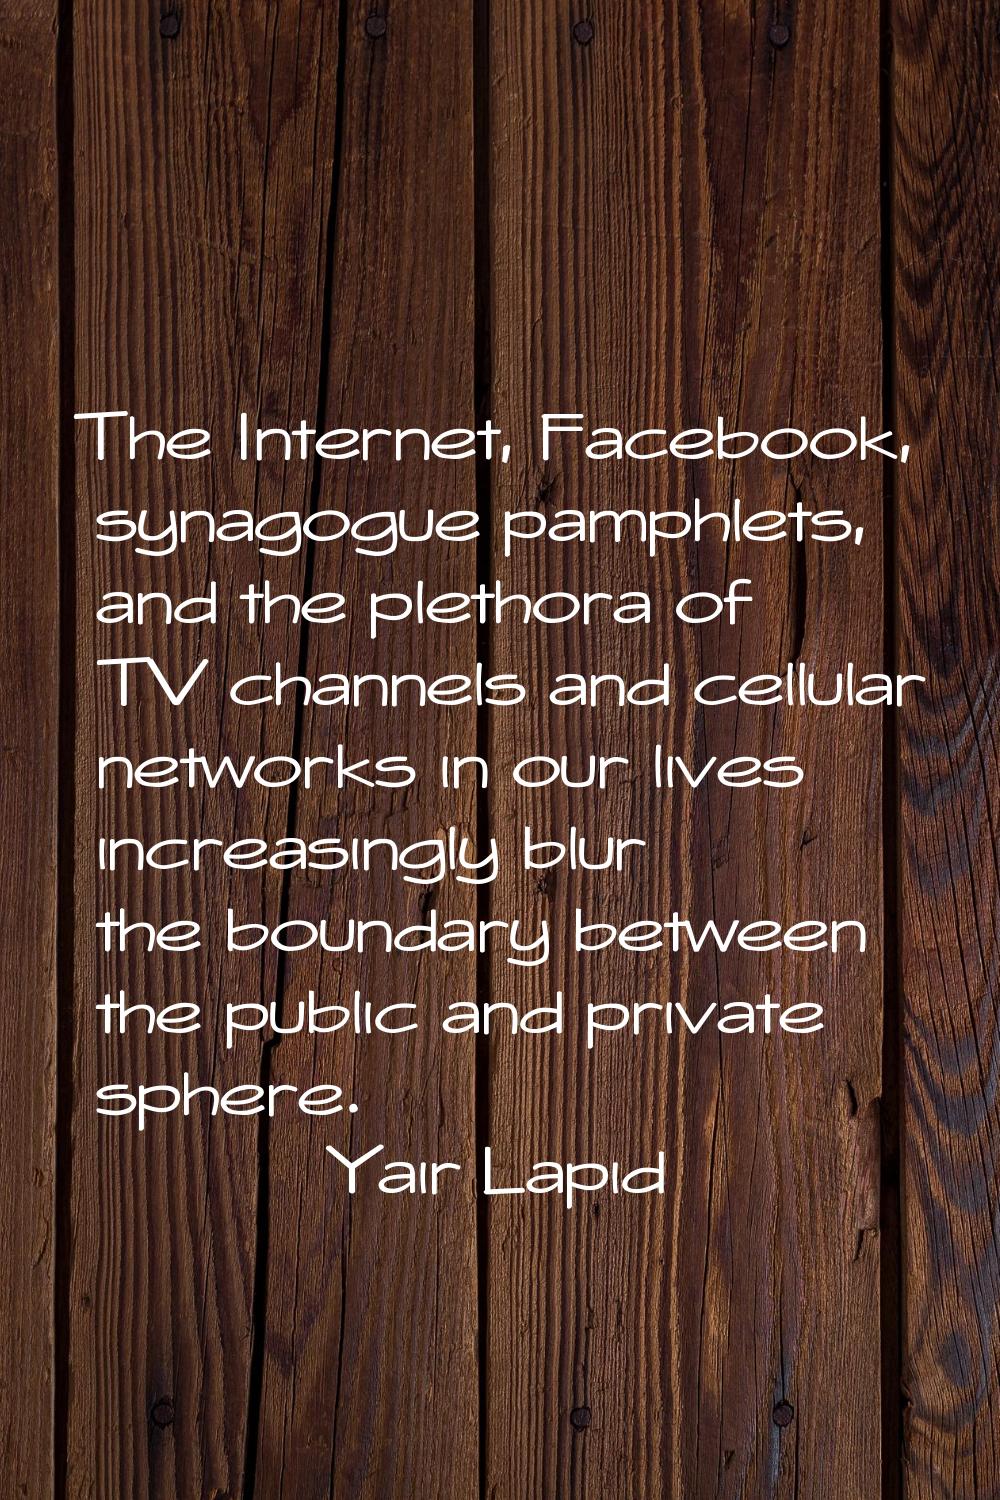 The Internet, Facebook, synagogue pamphlets, and the plethora of TV channels and cellular networks 